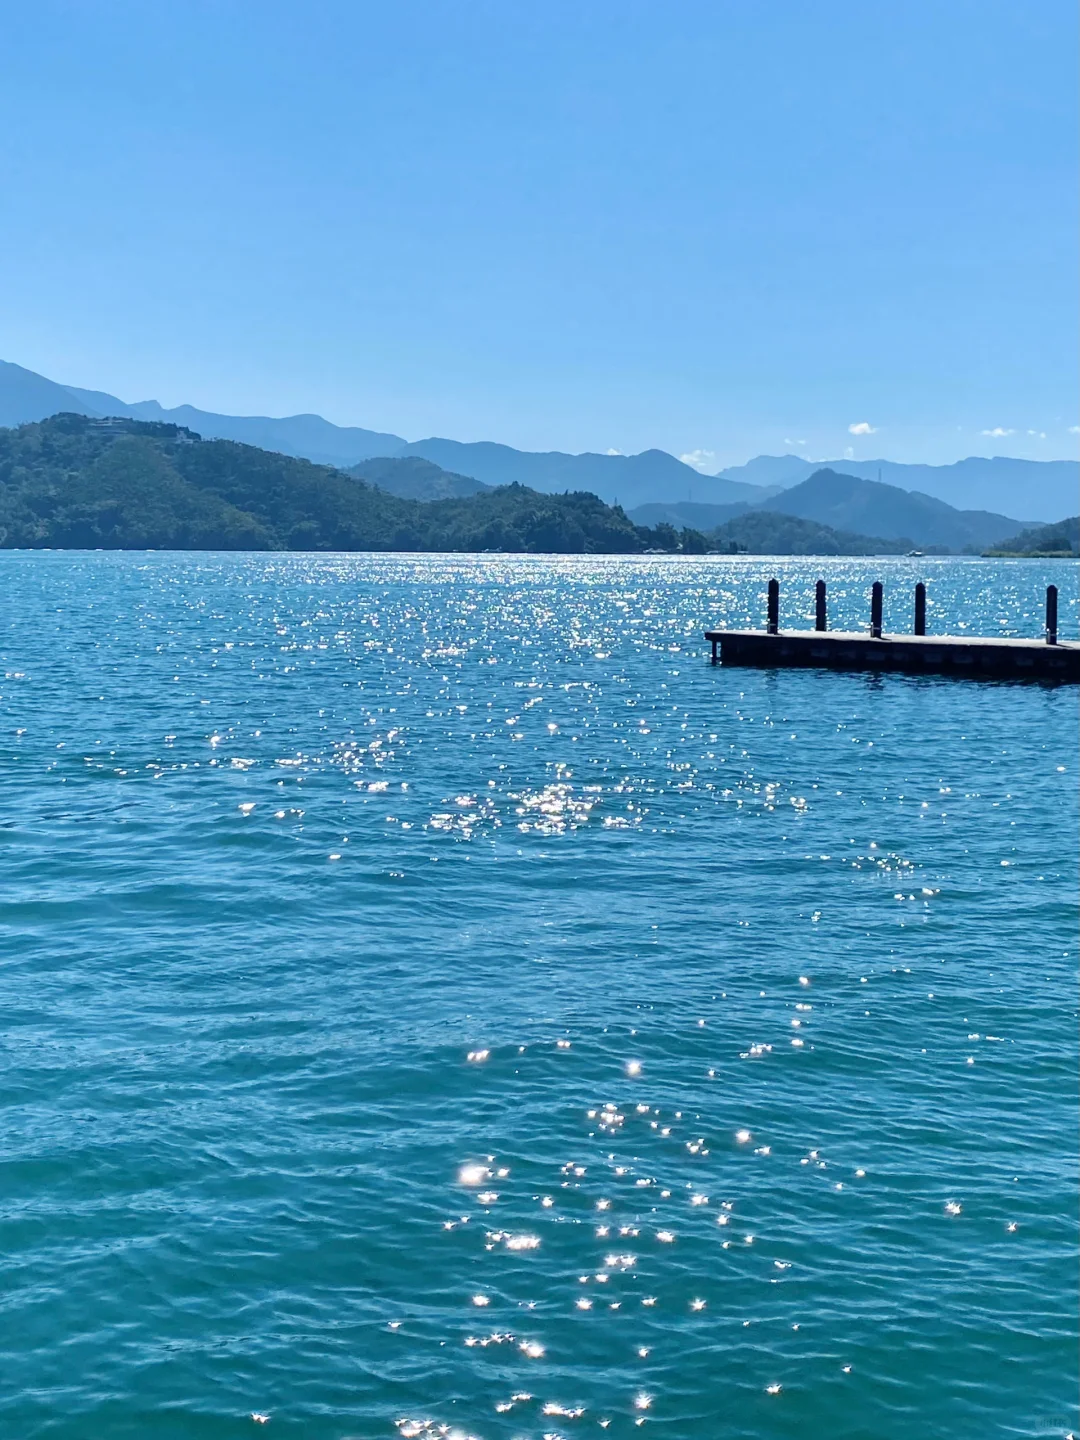 Taiwan-Taiwan's Sun Moon Lake in elementary school textbooks, enjoy the beautiful scenery by boat and cable car